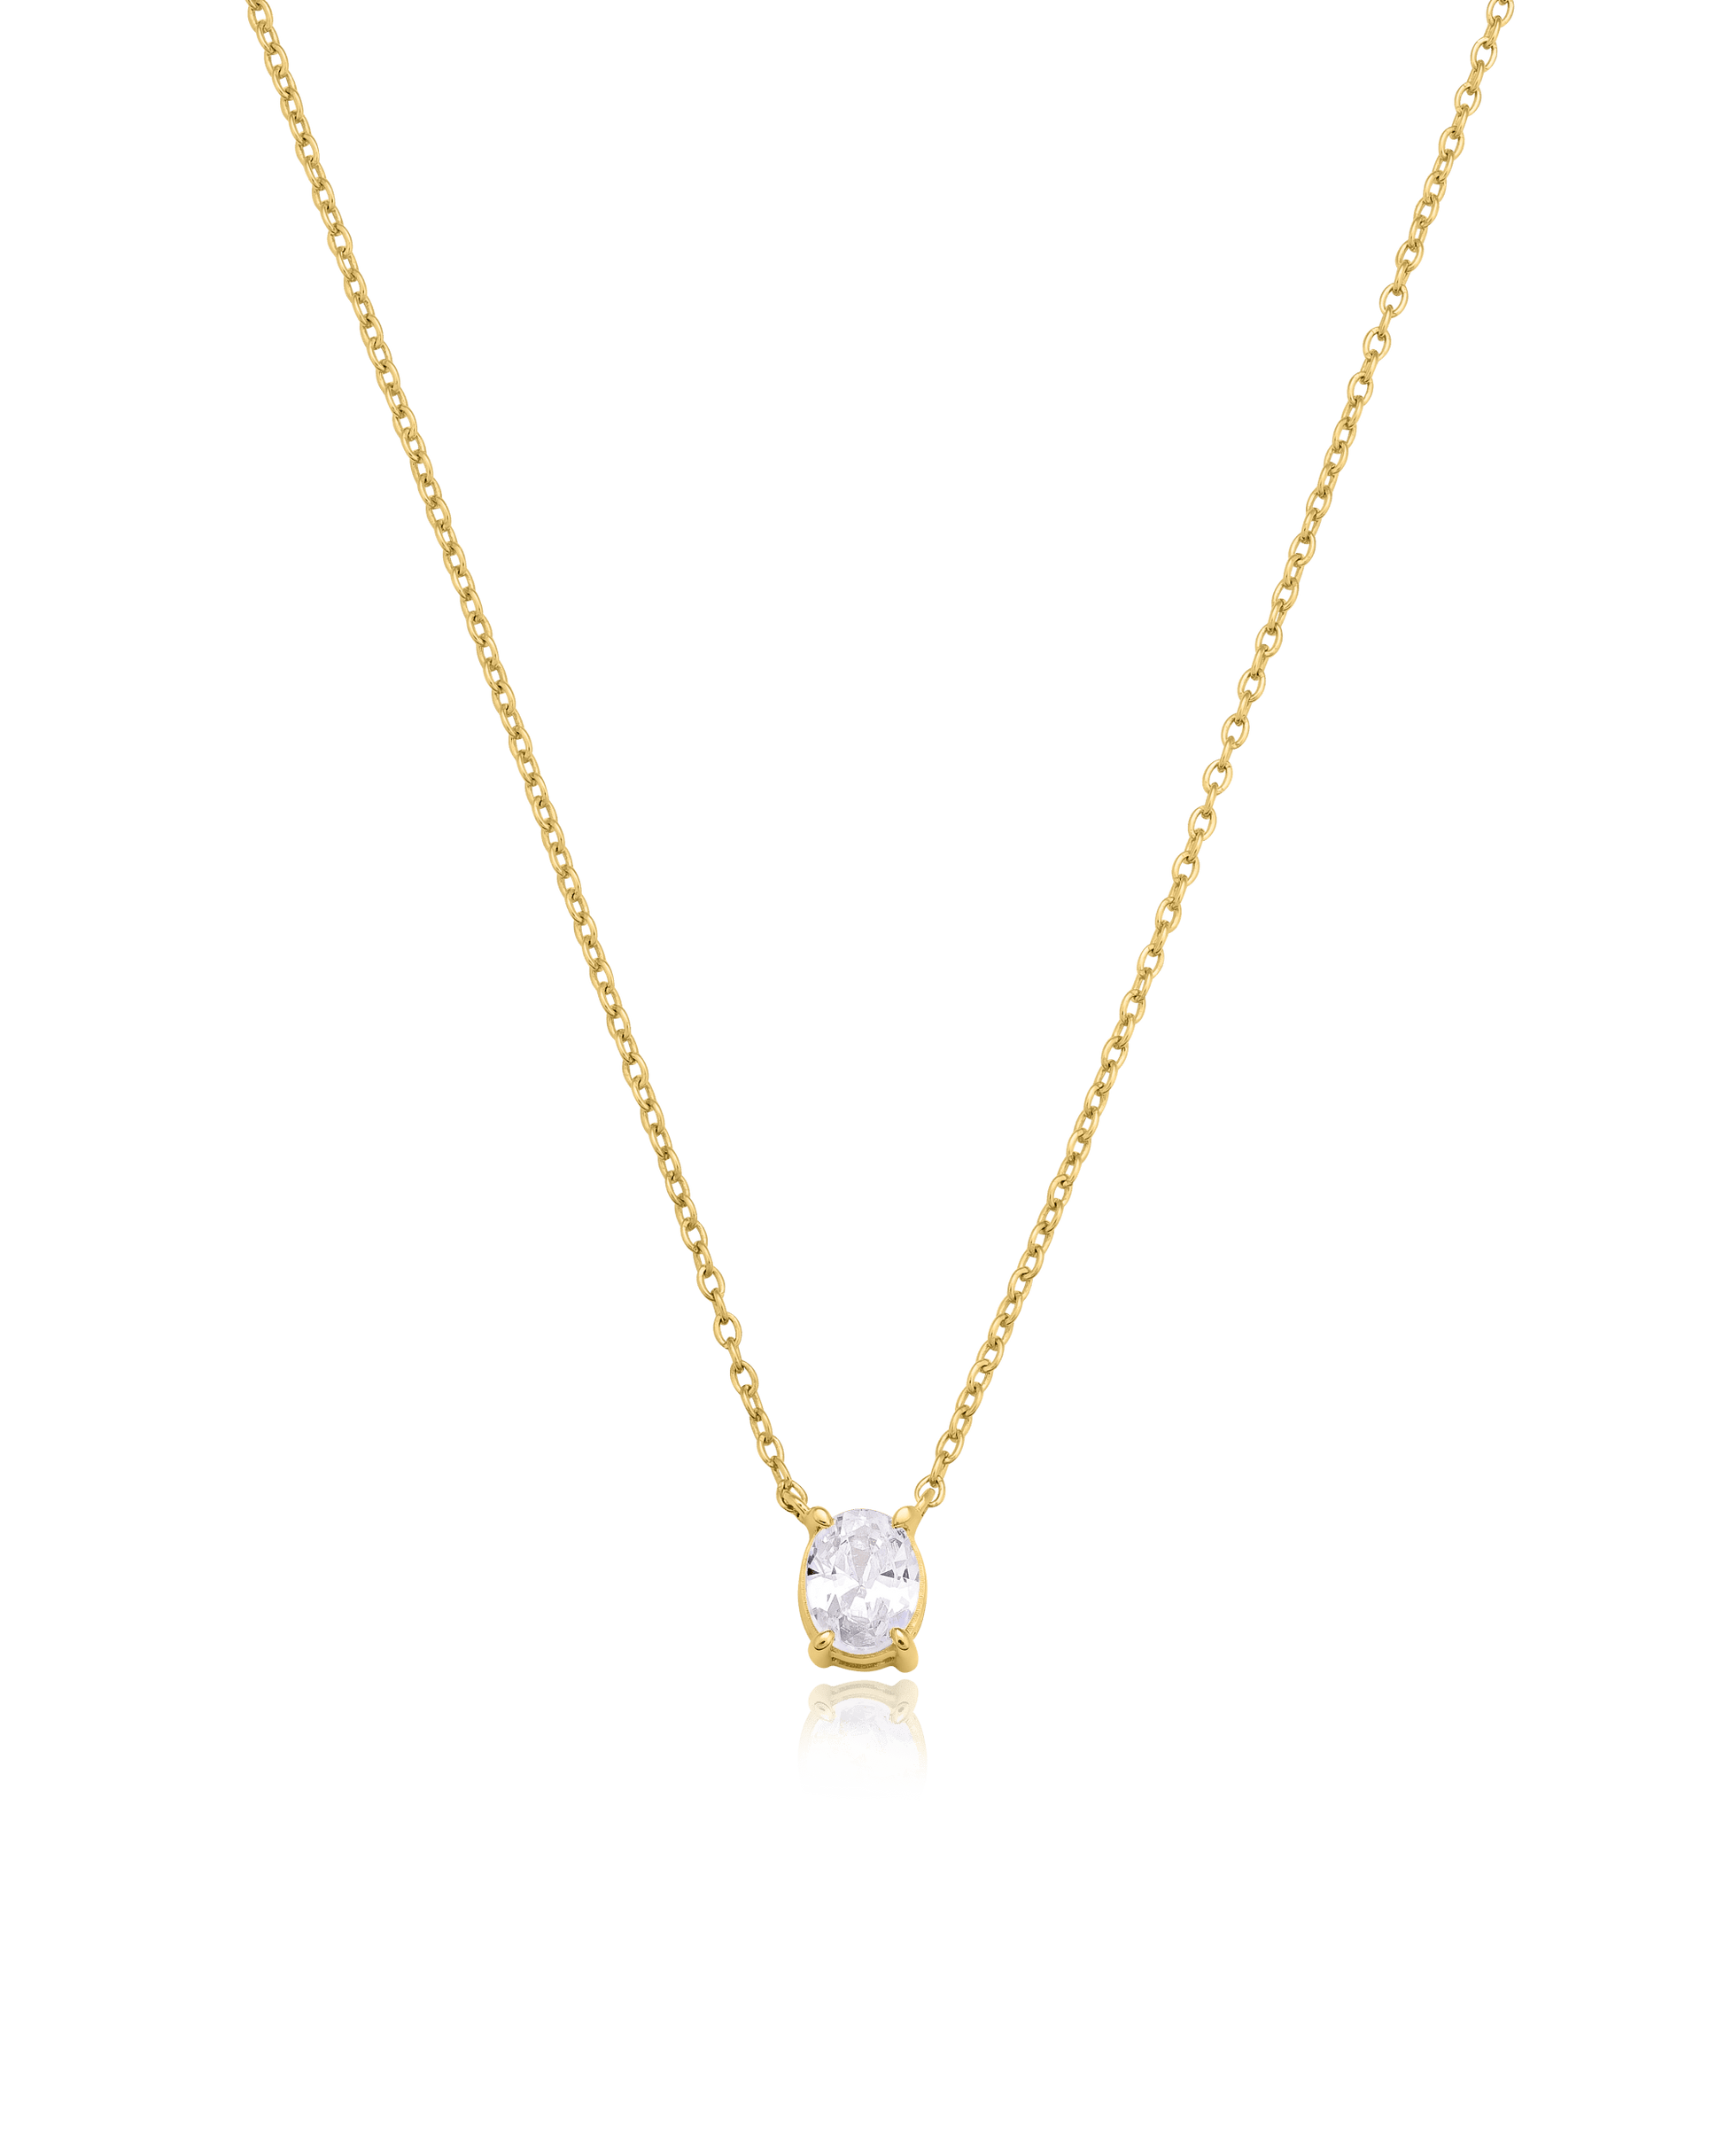 Oval Solitaire Diamond Necklace - 14K Rose Gold Necklaces magal-dev 